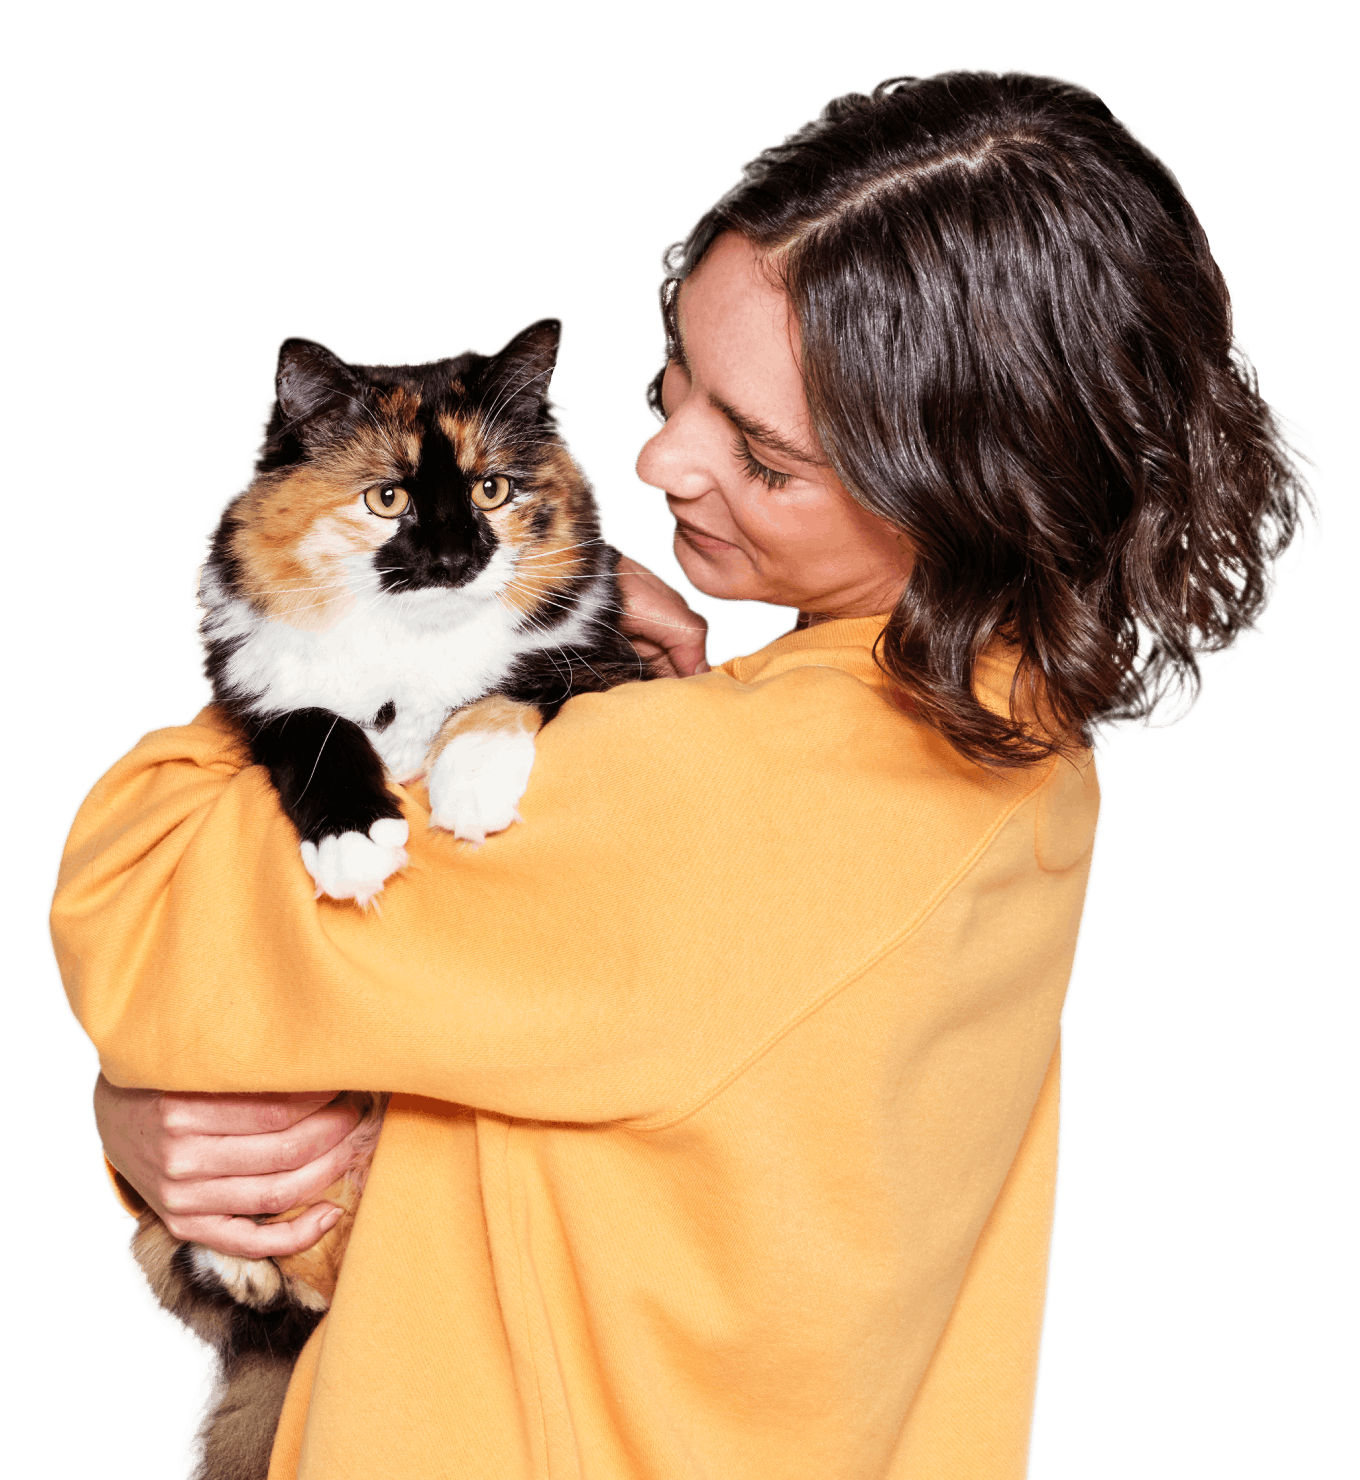 A woman holding a  fluffy, calico cat